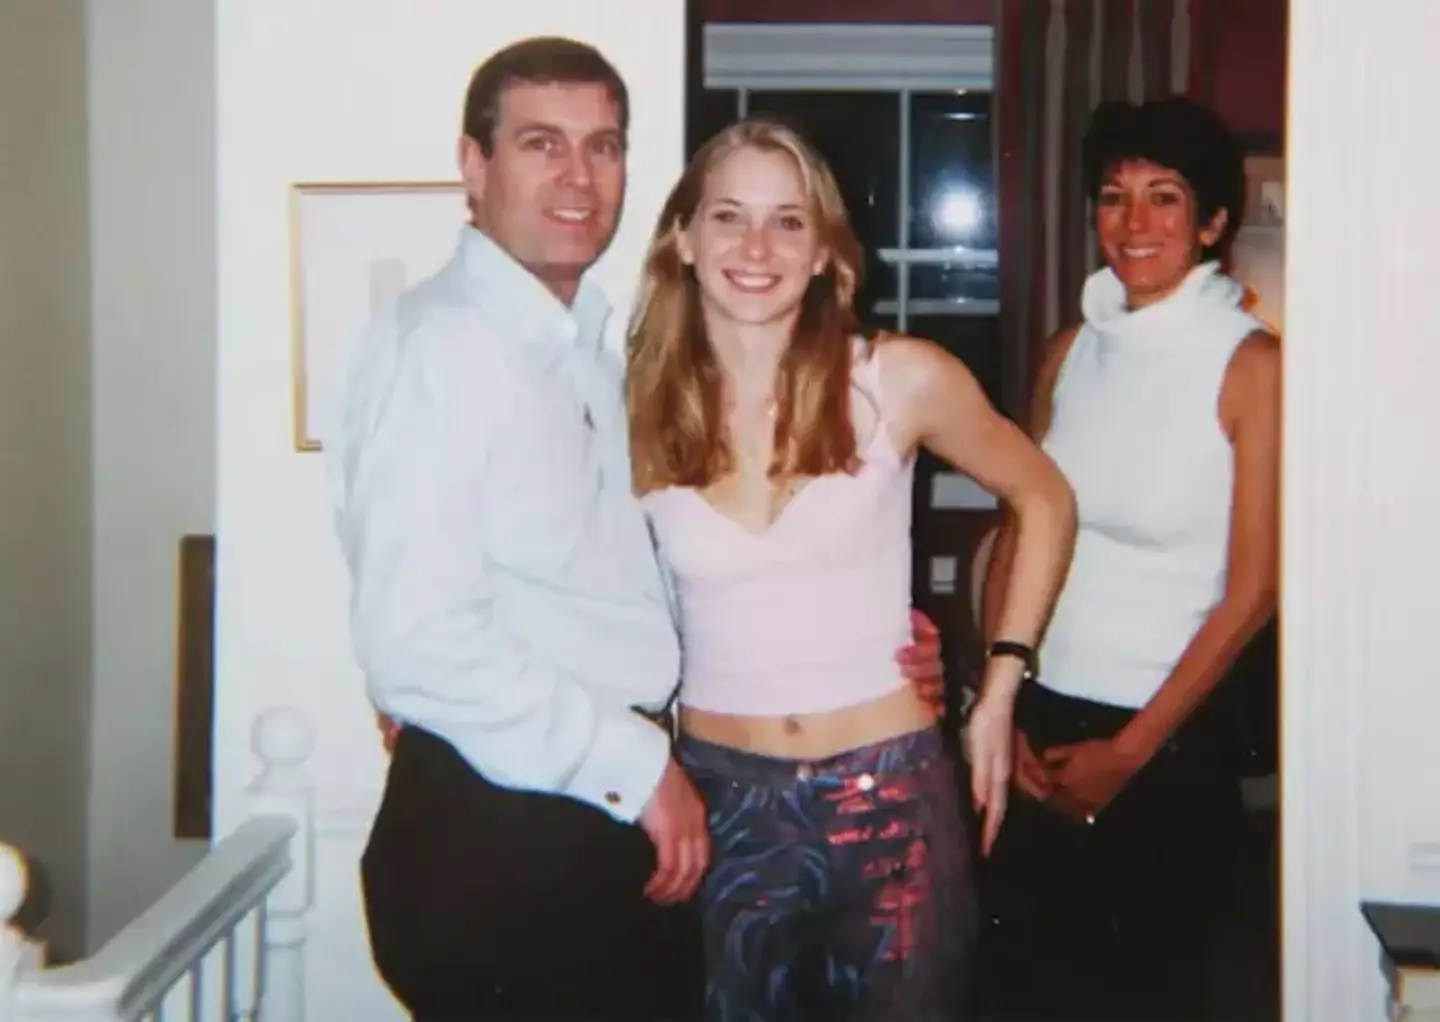 A notorious shows Prince Andrew and Virginia Giuffre, with Ghislaine Maxwell in the background.